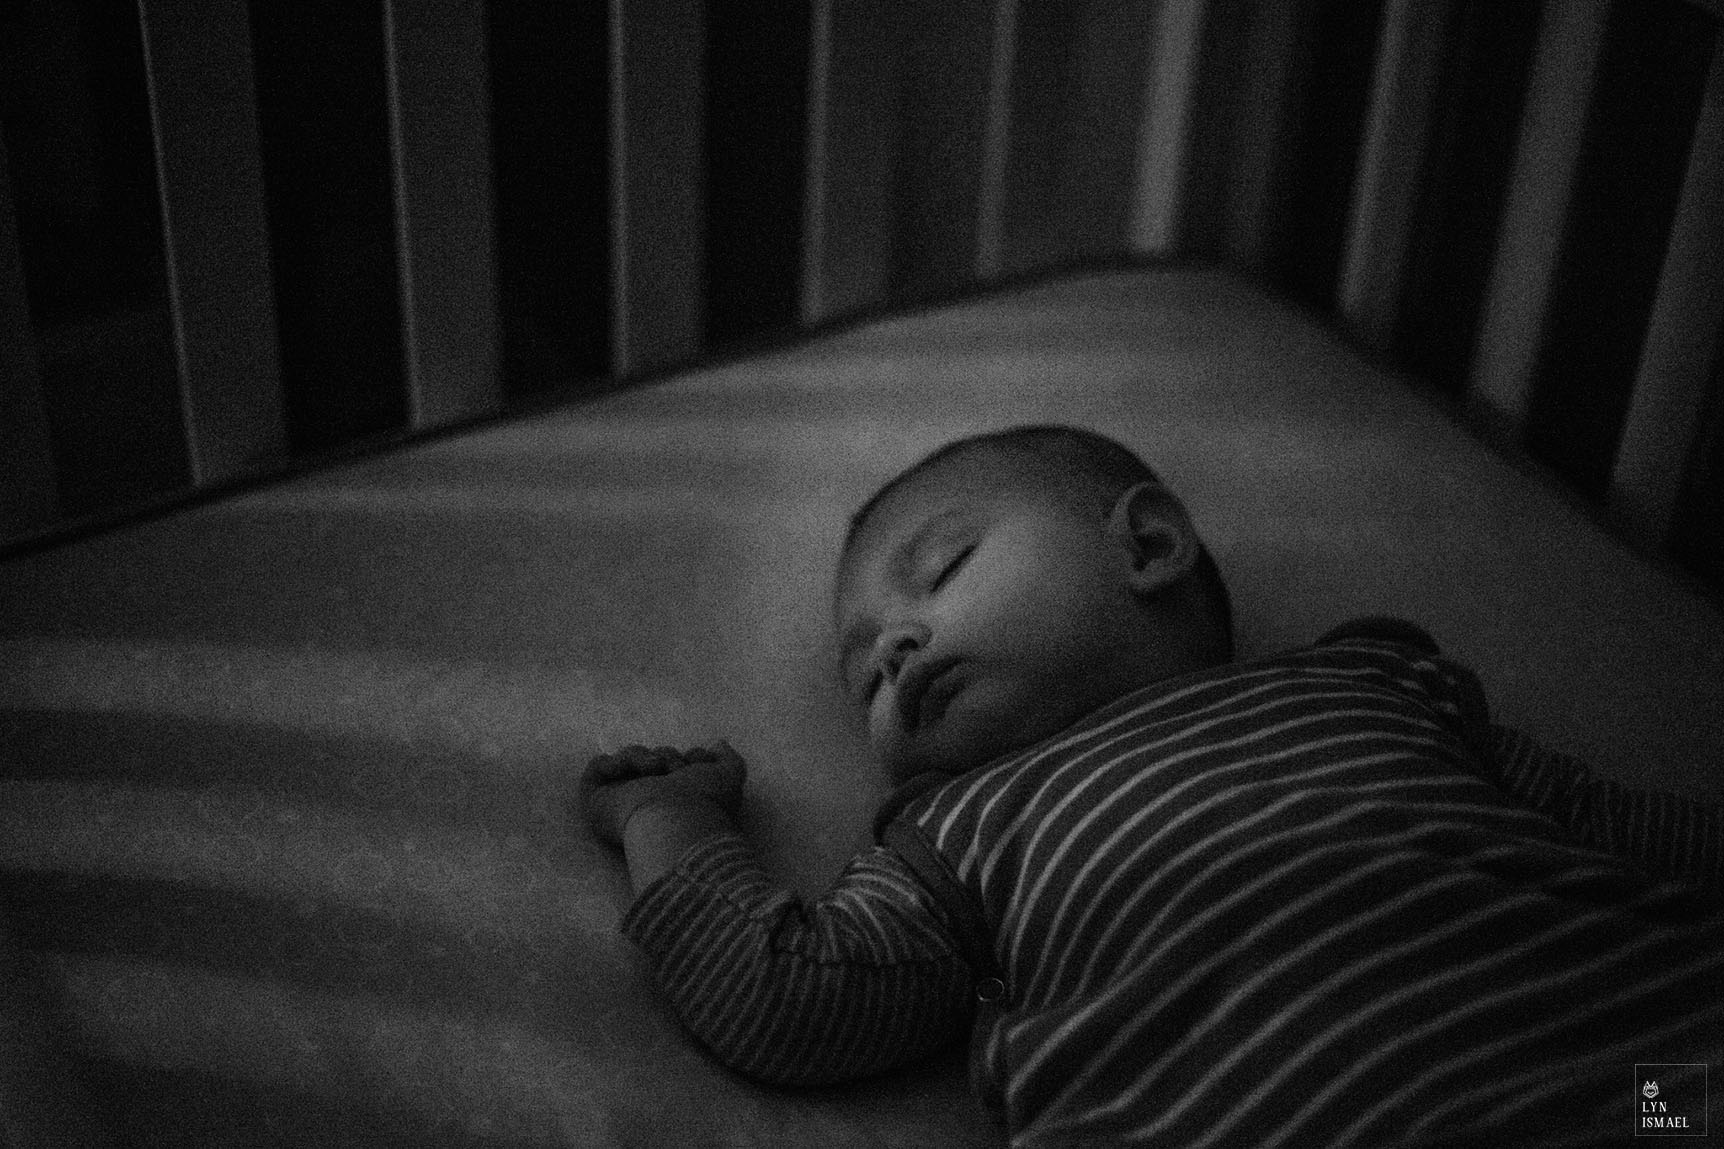 newborn sleeps in his crib as photographed by Kitchener family documentary photographer.